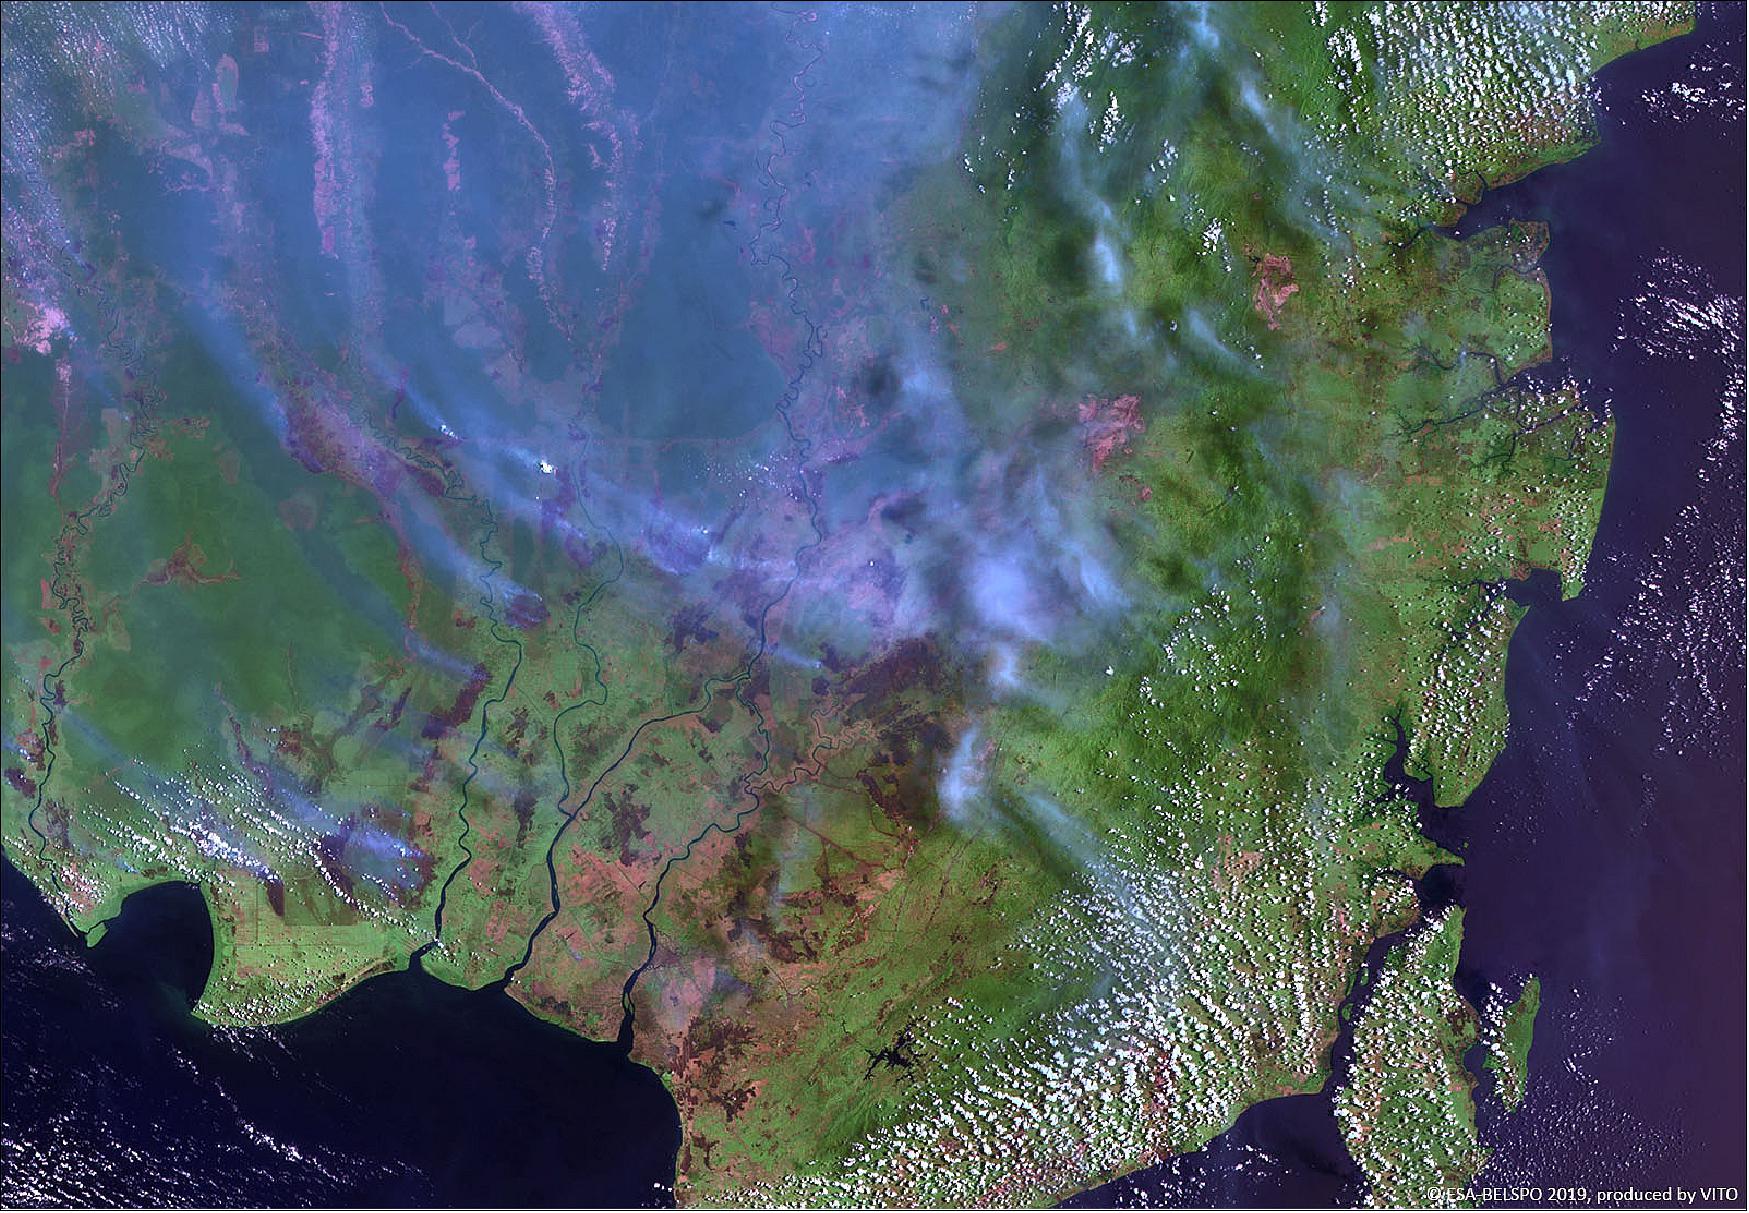 Figure 22: This false-color image from ESA's PROBA-V minisatellite, captured on 18 September, shows an abundance of smoke plumes over Kalimantan, the Indonesian part of the island of Borneo (image credit: ESA/Belspo – produced by VITO)